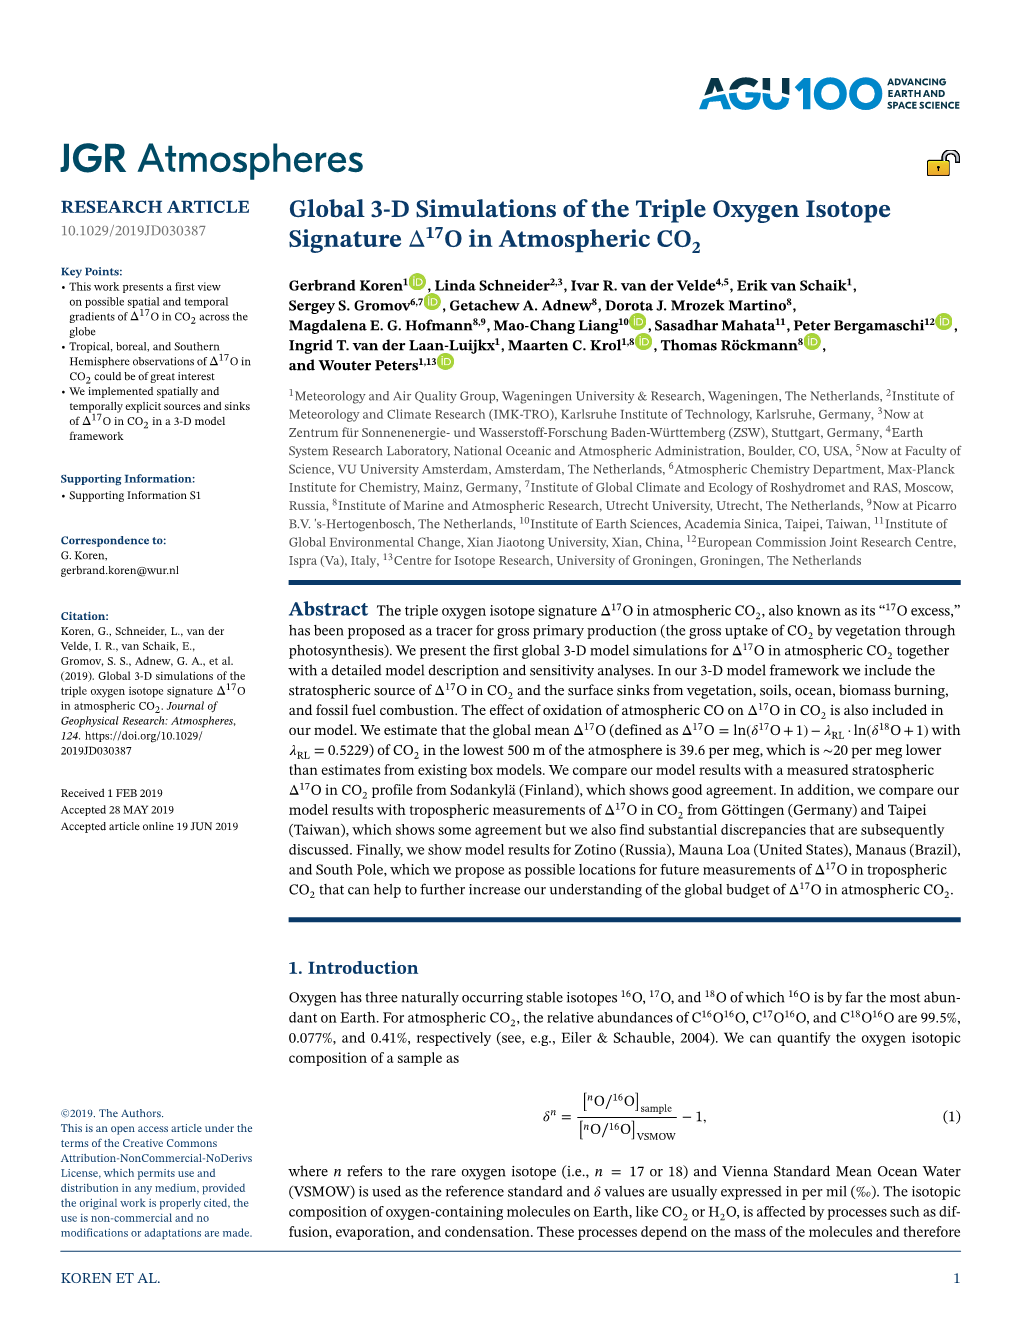 Global 3-D Simulations of the Triple Oxygen Isotope Signature 17O in Atmospheric